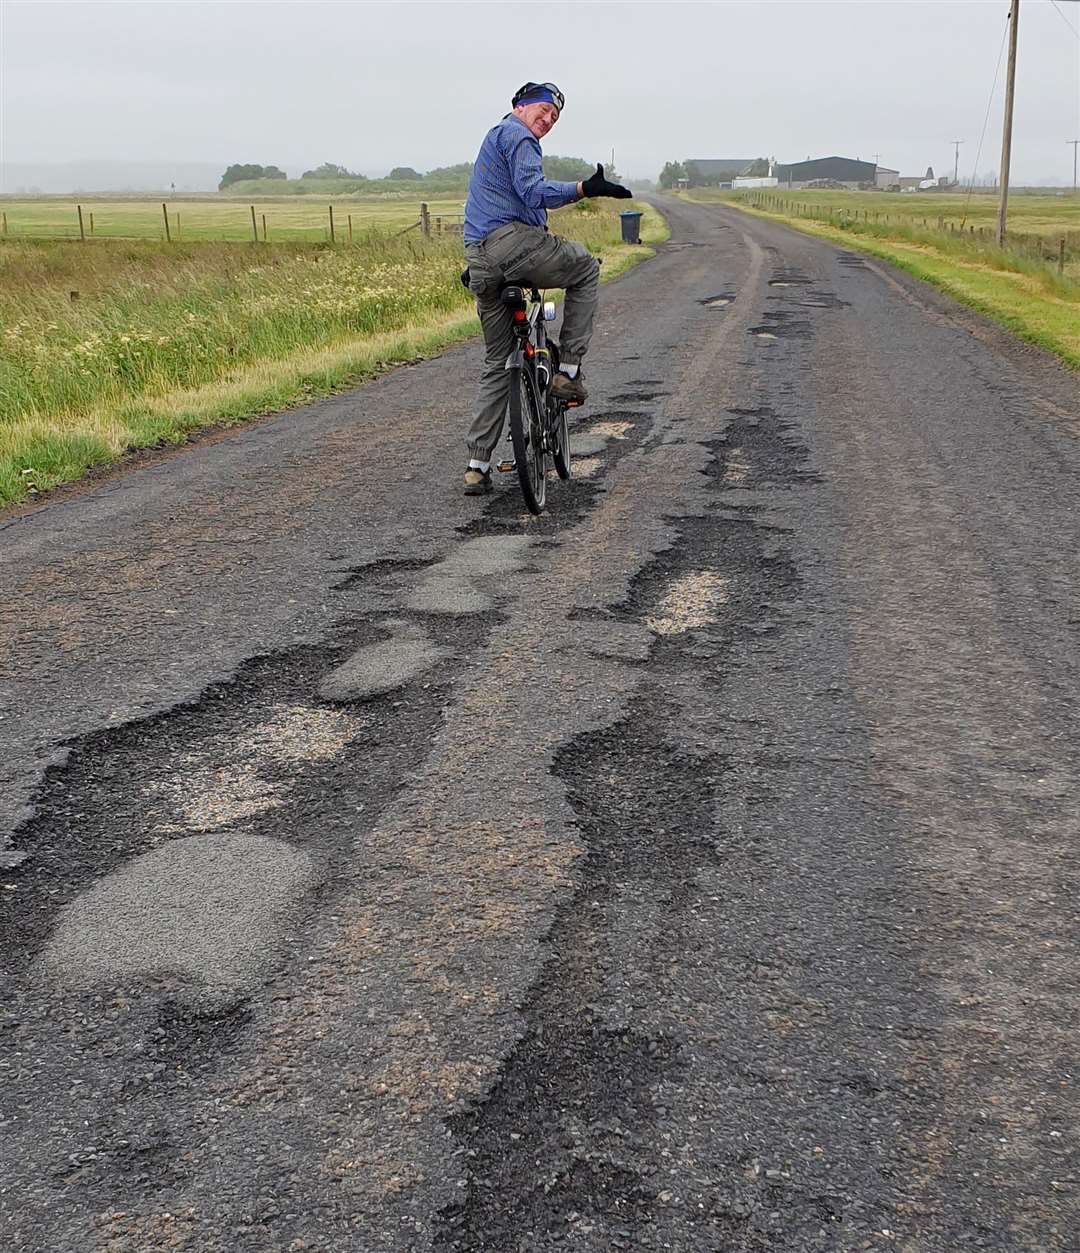 Caithness Roads Recovery campaigner Iain Gregory showing his displeasure at potholes during a bike ride in the Halkirk area.